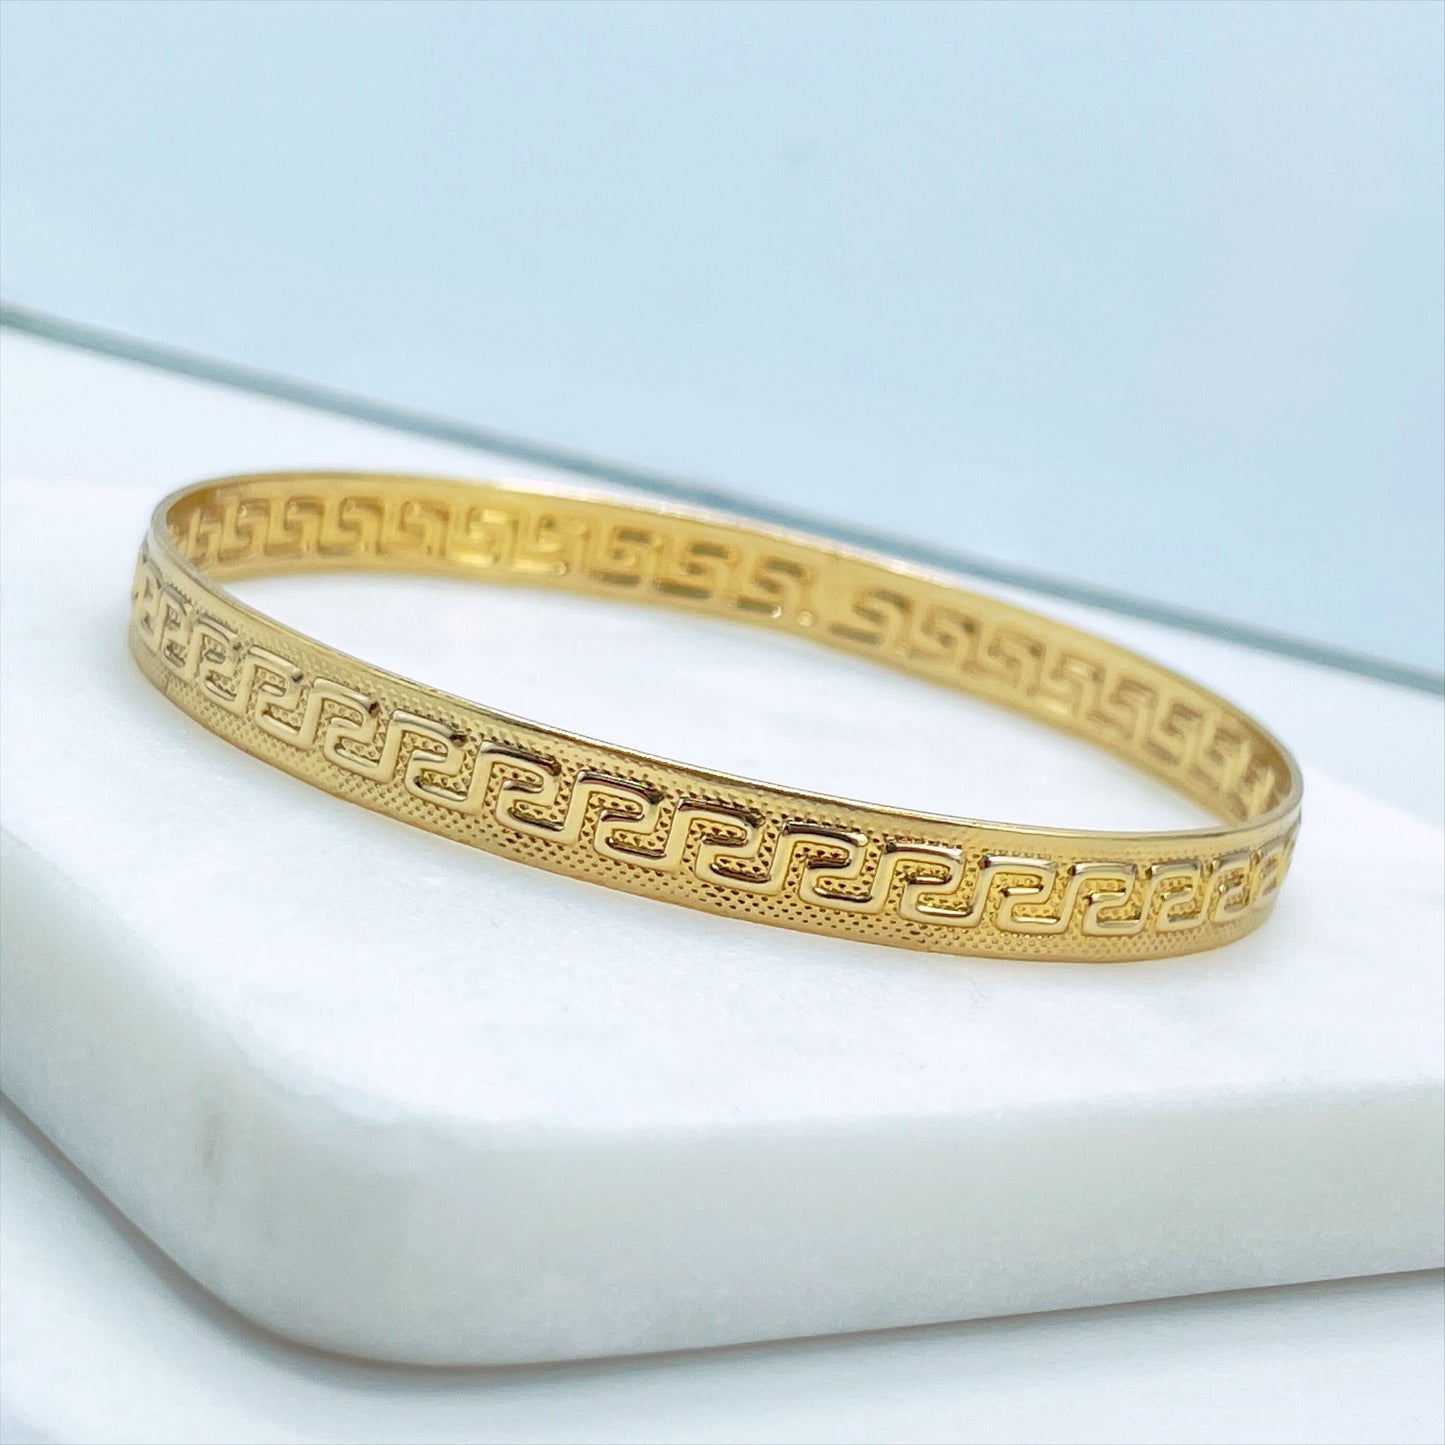 18k Gold Filled Texturized with Greek Key Pattern Design Bangle Cuff Bracelet, Wholesale Jewelry Making Supplies